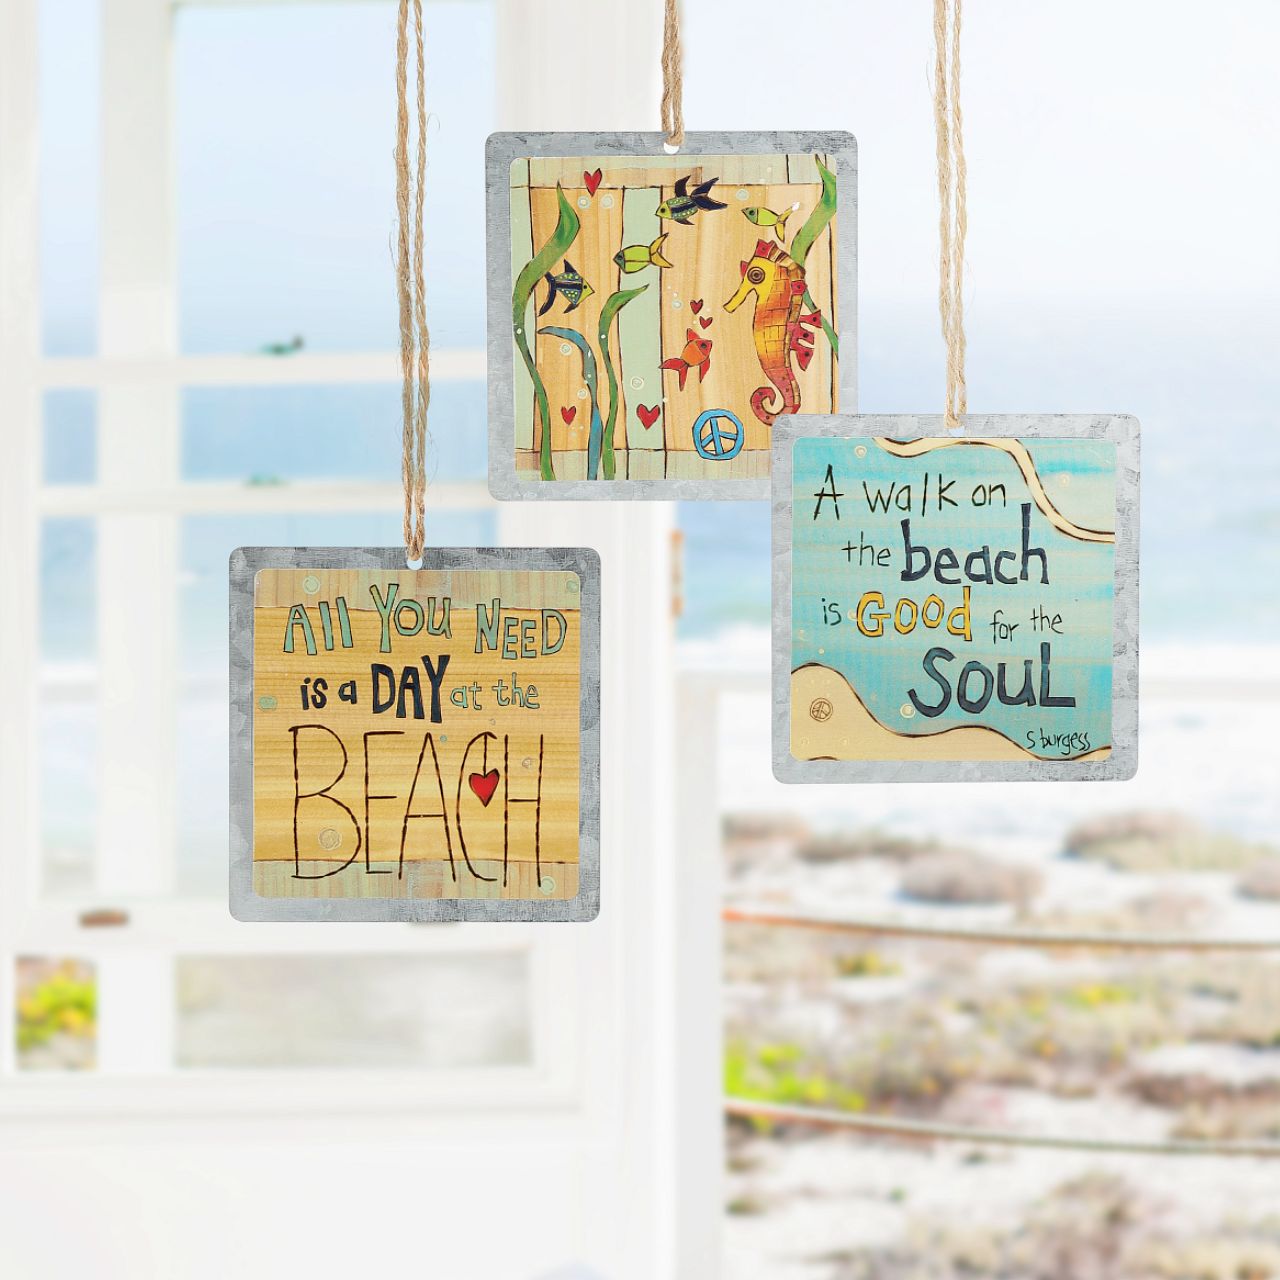 The Voice of the Sea Tin Hanging Ornament  Painted Peace. Designed by Stephanie Burgess, each colourful piece in the collection has been designed to create feelings of peace and love in your home.